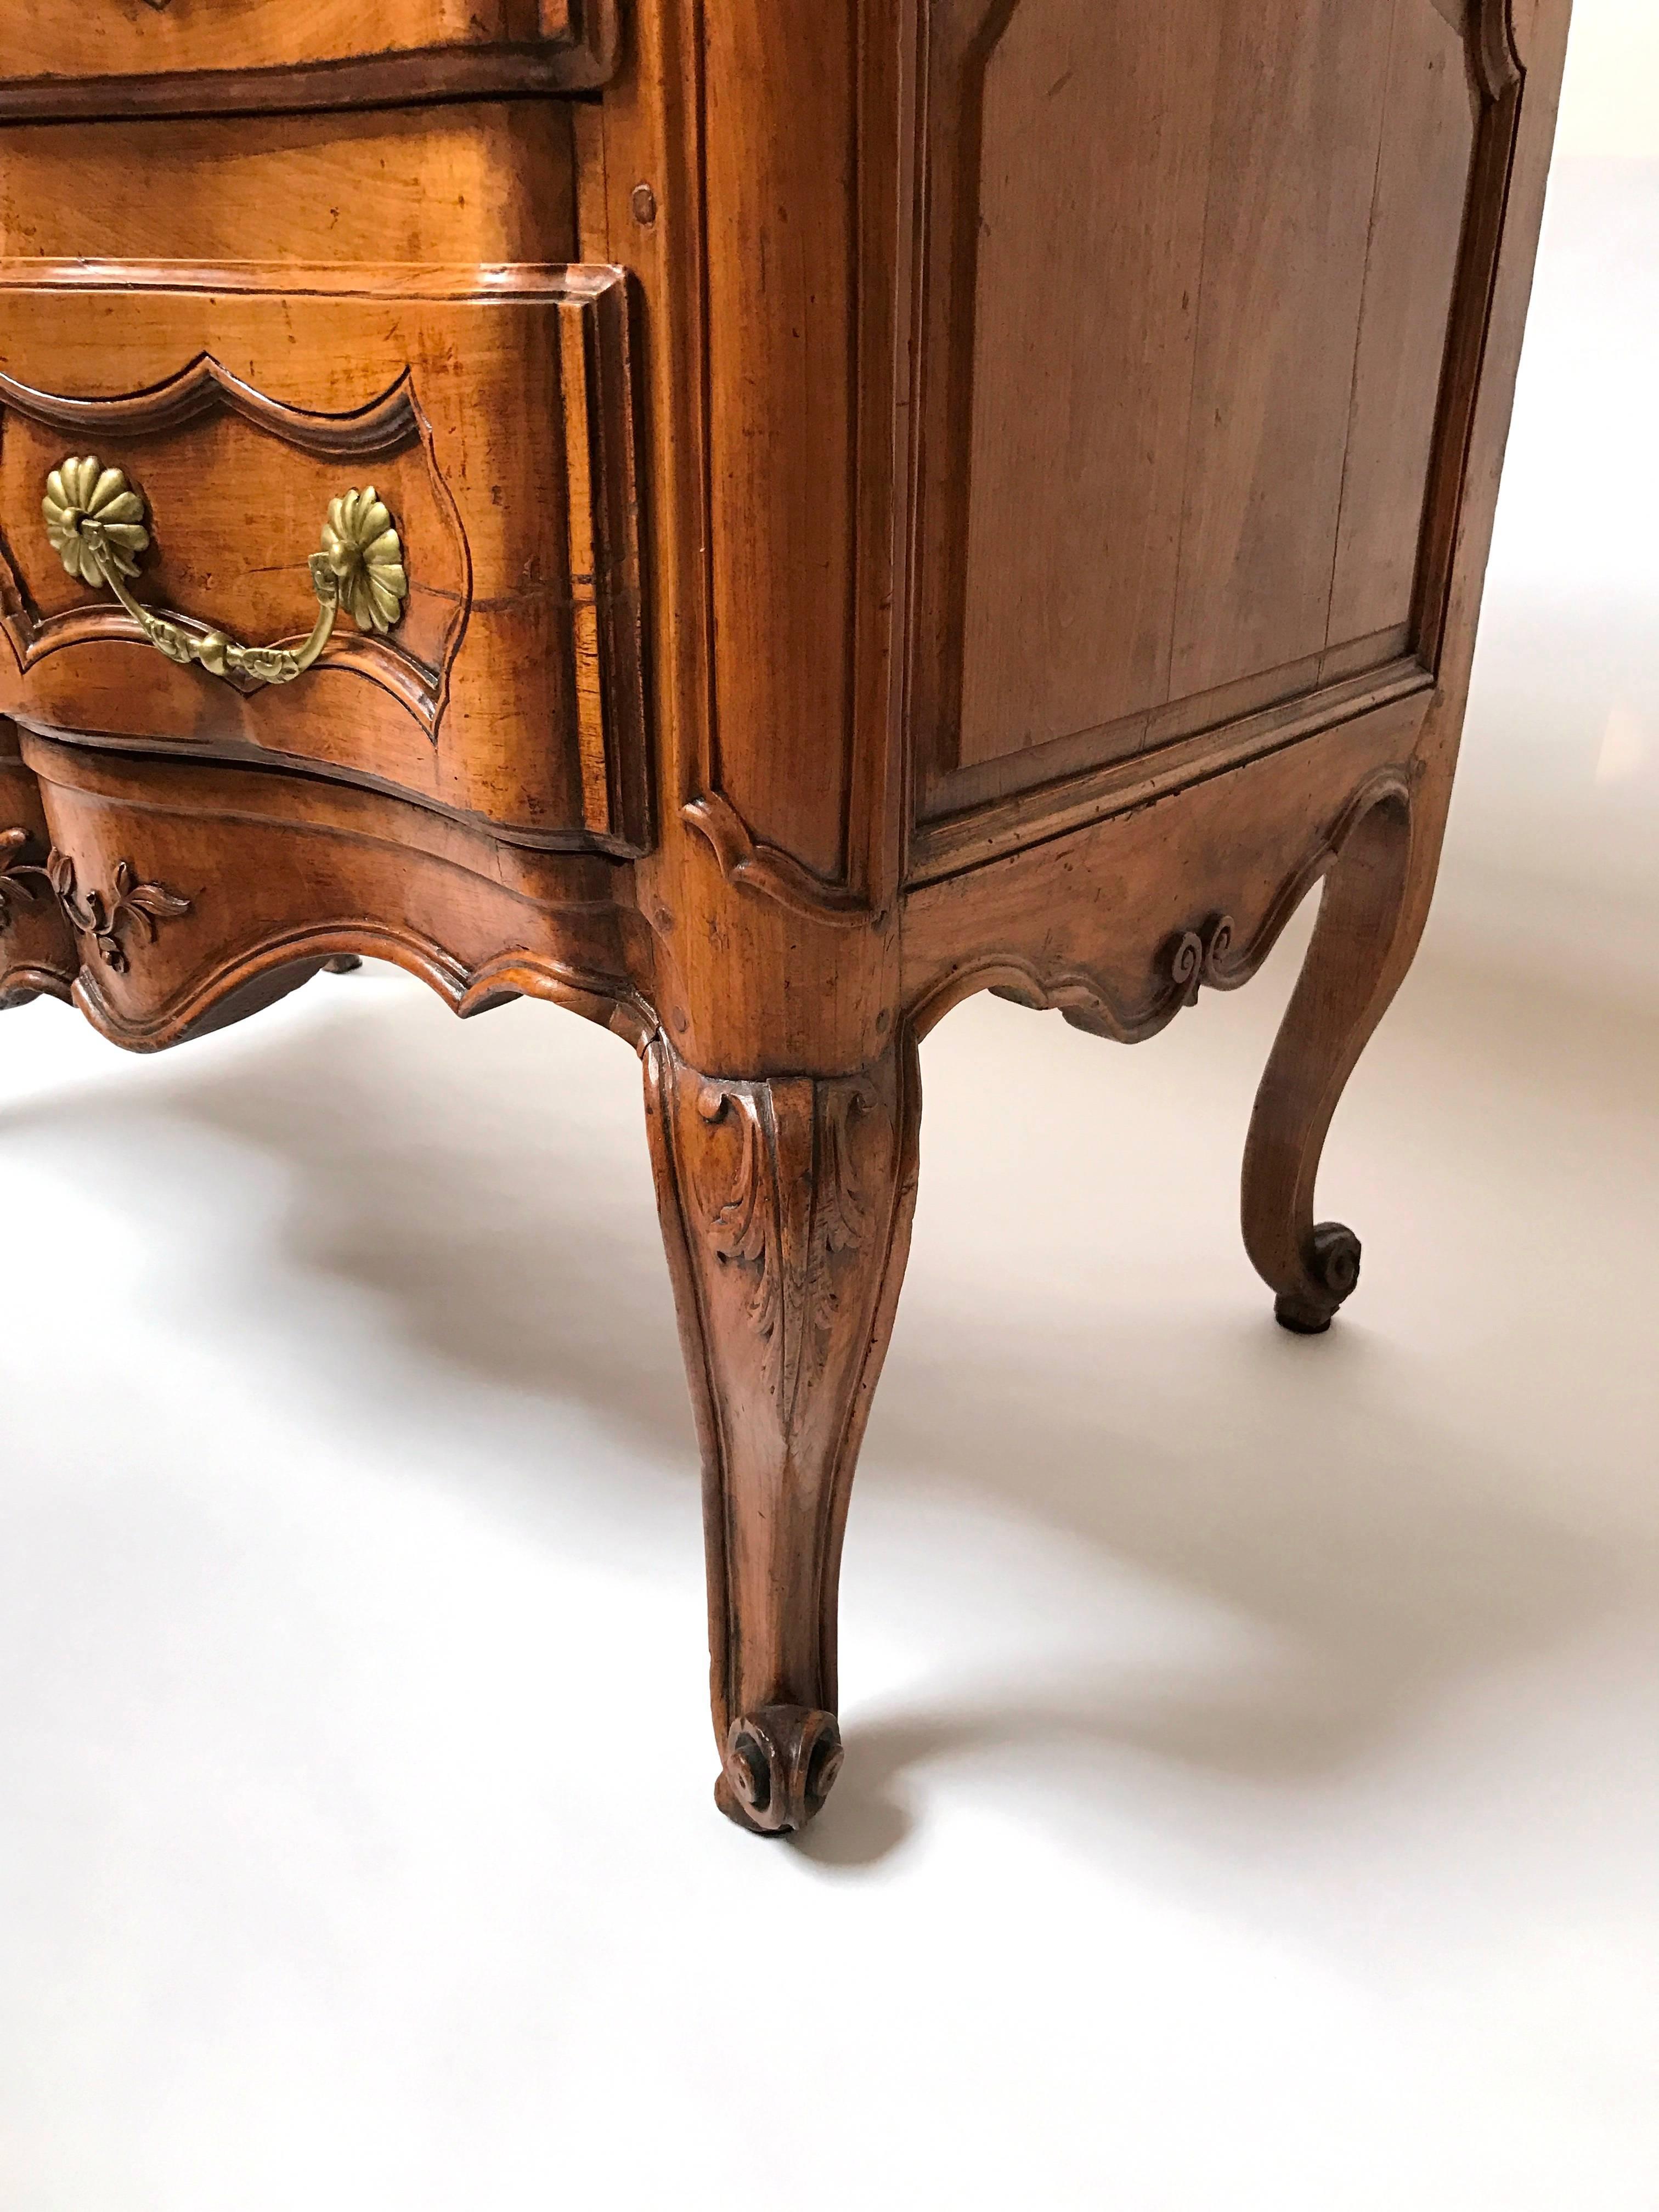 Period Regence Cherrywood Commode In Excellent Condition For Sale In Dallas, TX